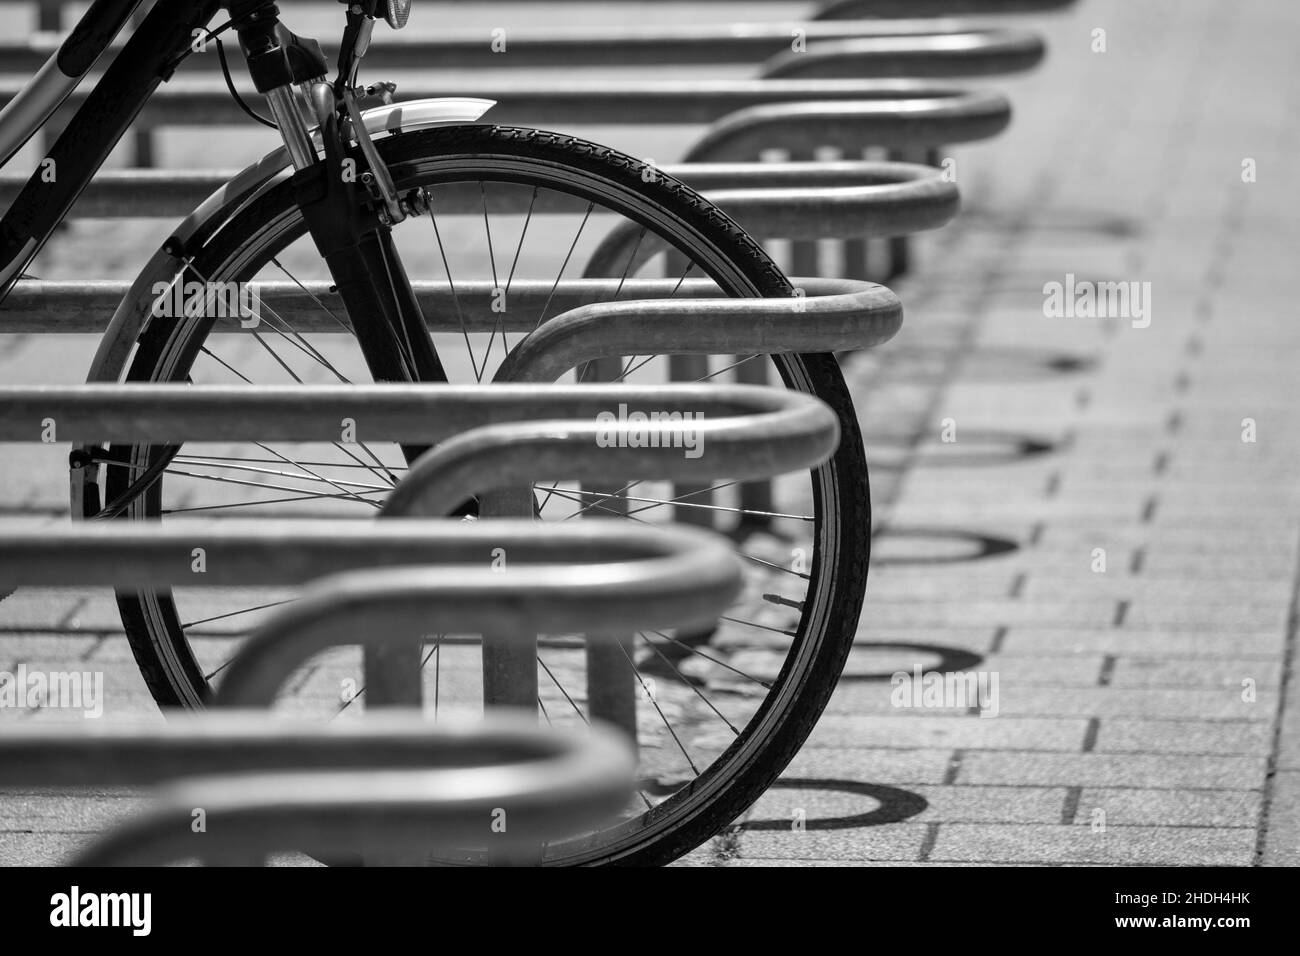 Bicycle racks Black and White Stock Photos & Images - Alamy